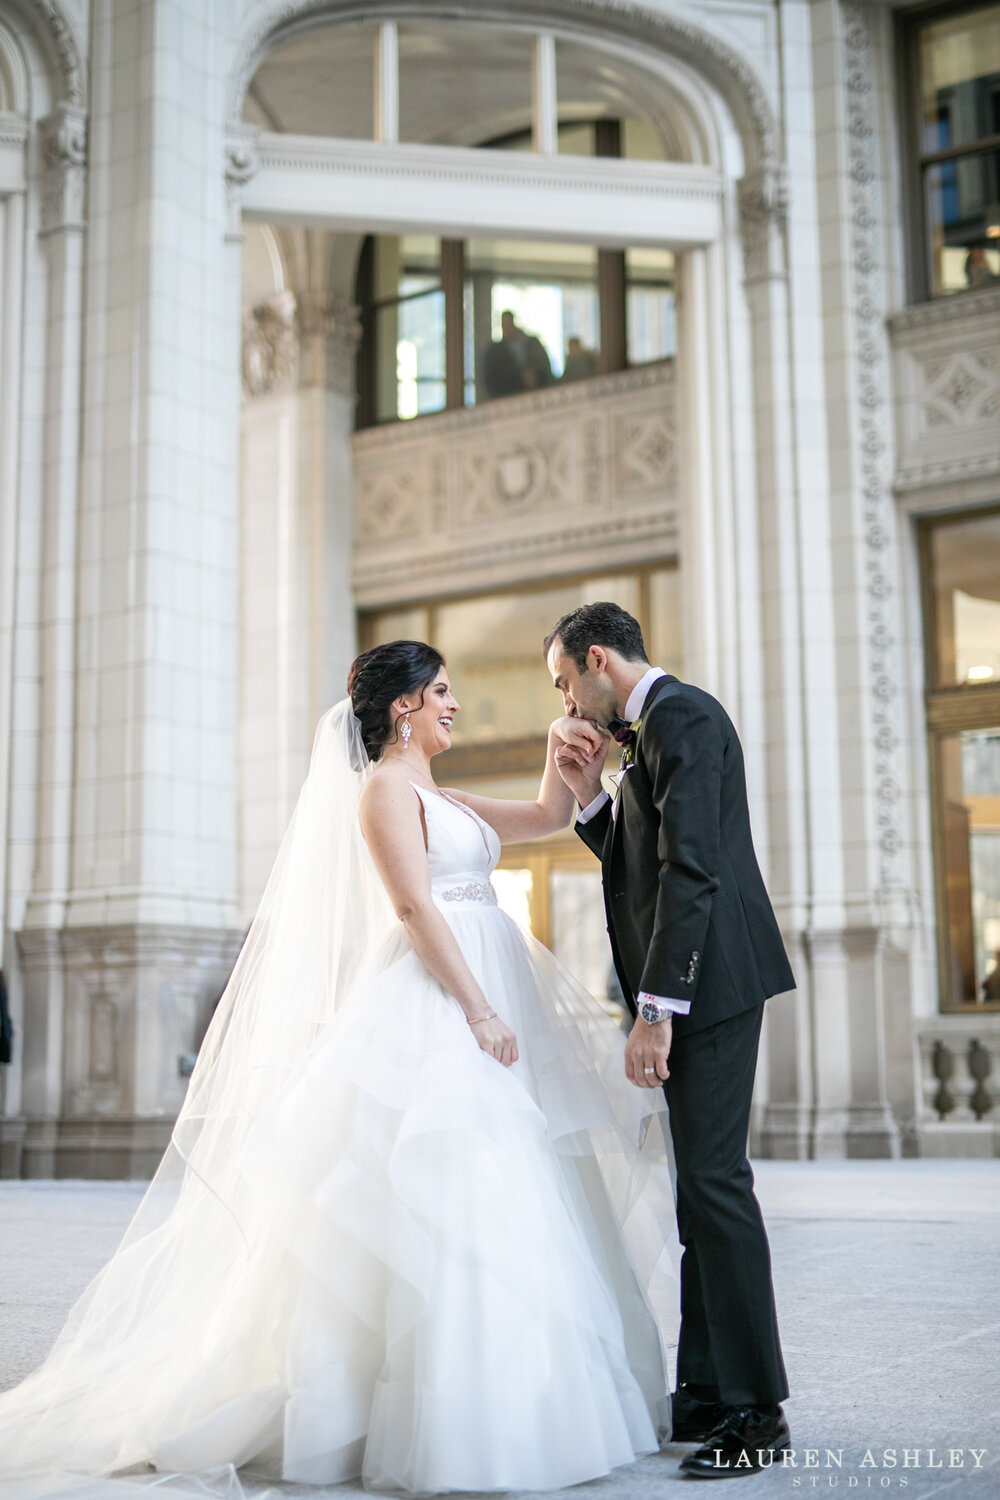 intercontinental-chicago-high-end-michigan-ave-magnificent-mile-wedding-chicago-wedding-photography-63.jpg